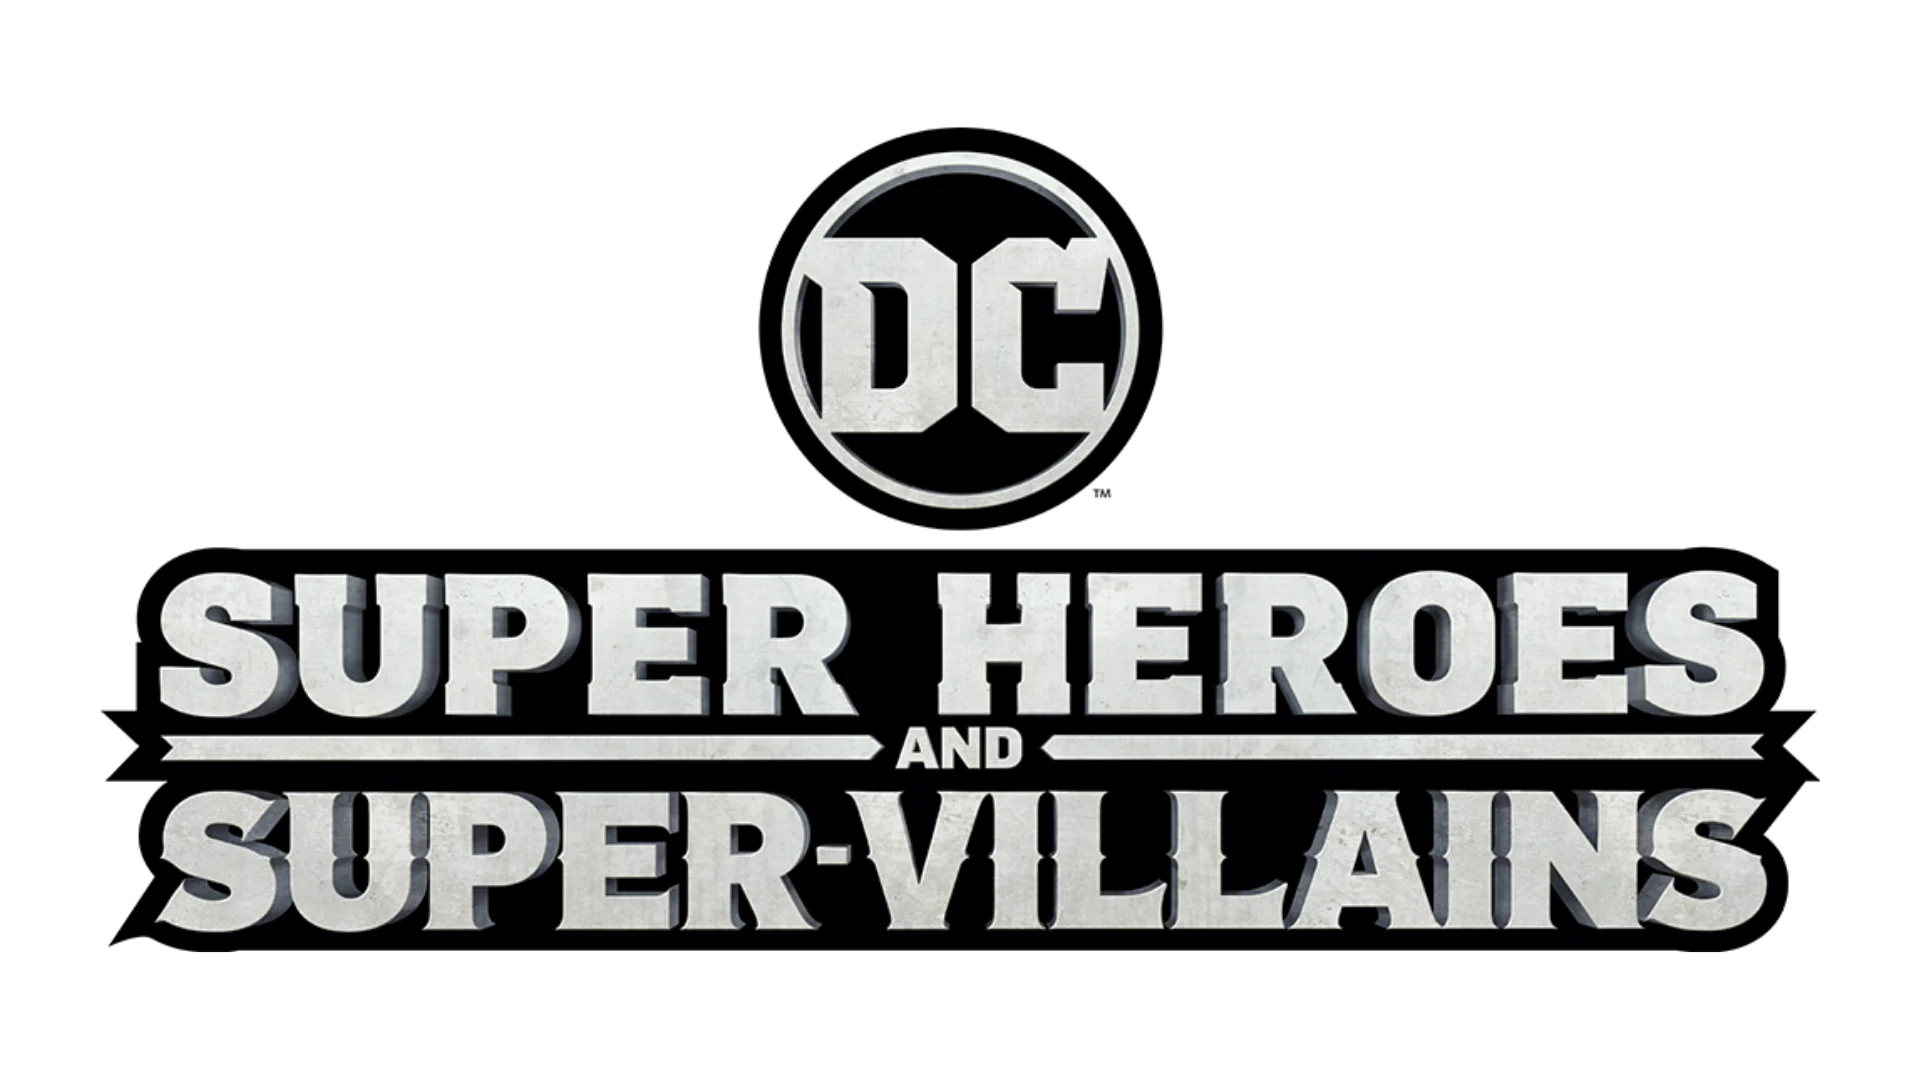 DC logo above text reading 'Super Heroes and Super-Villains' on a black background.